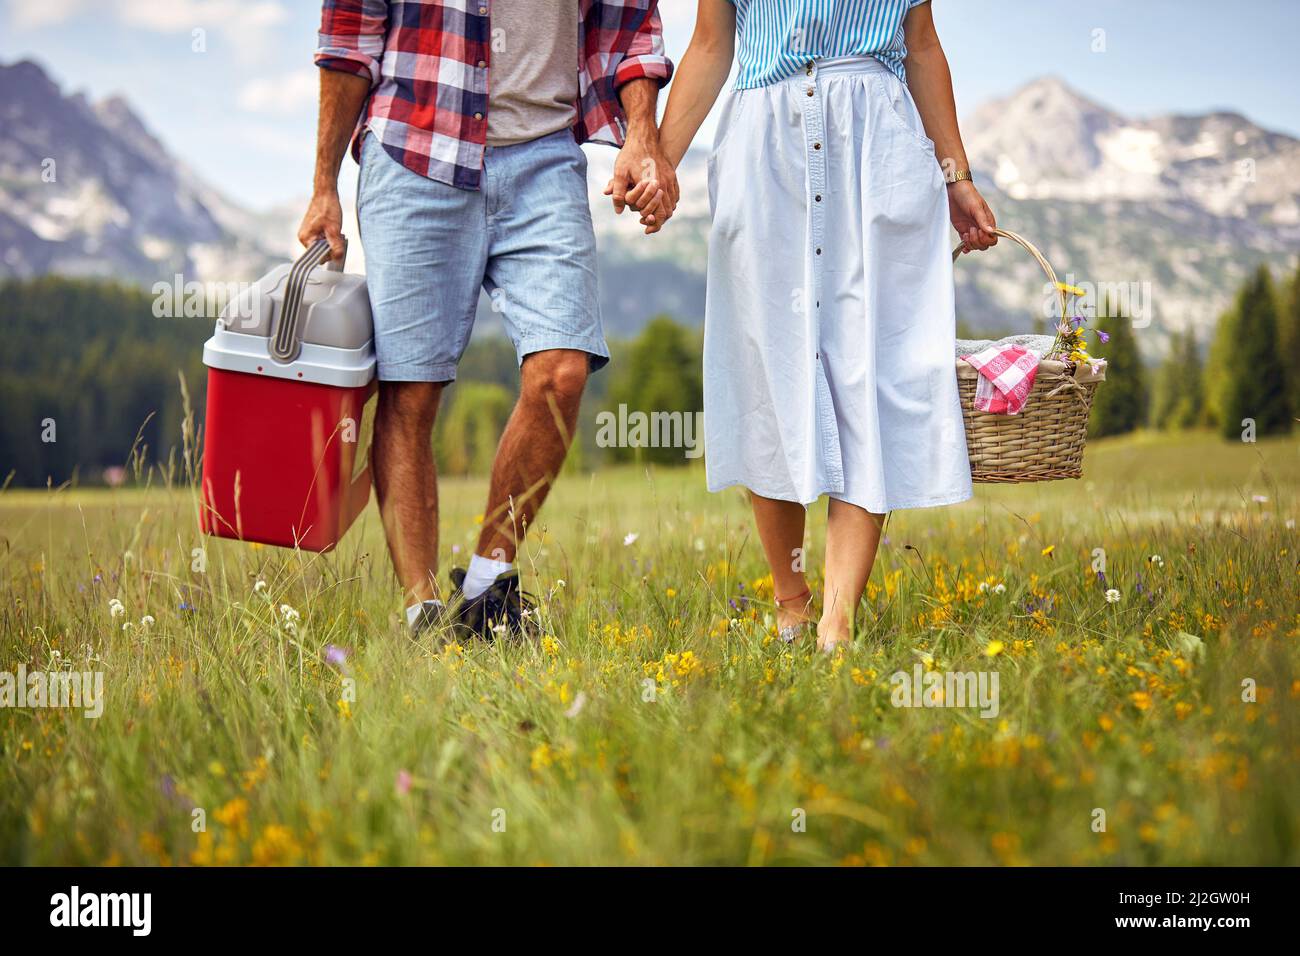 Young couple with picnic baskets holding hands and walking on green meadow. Fun, togetherness, lifestyle, nature concept. Stock Photo